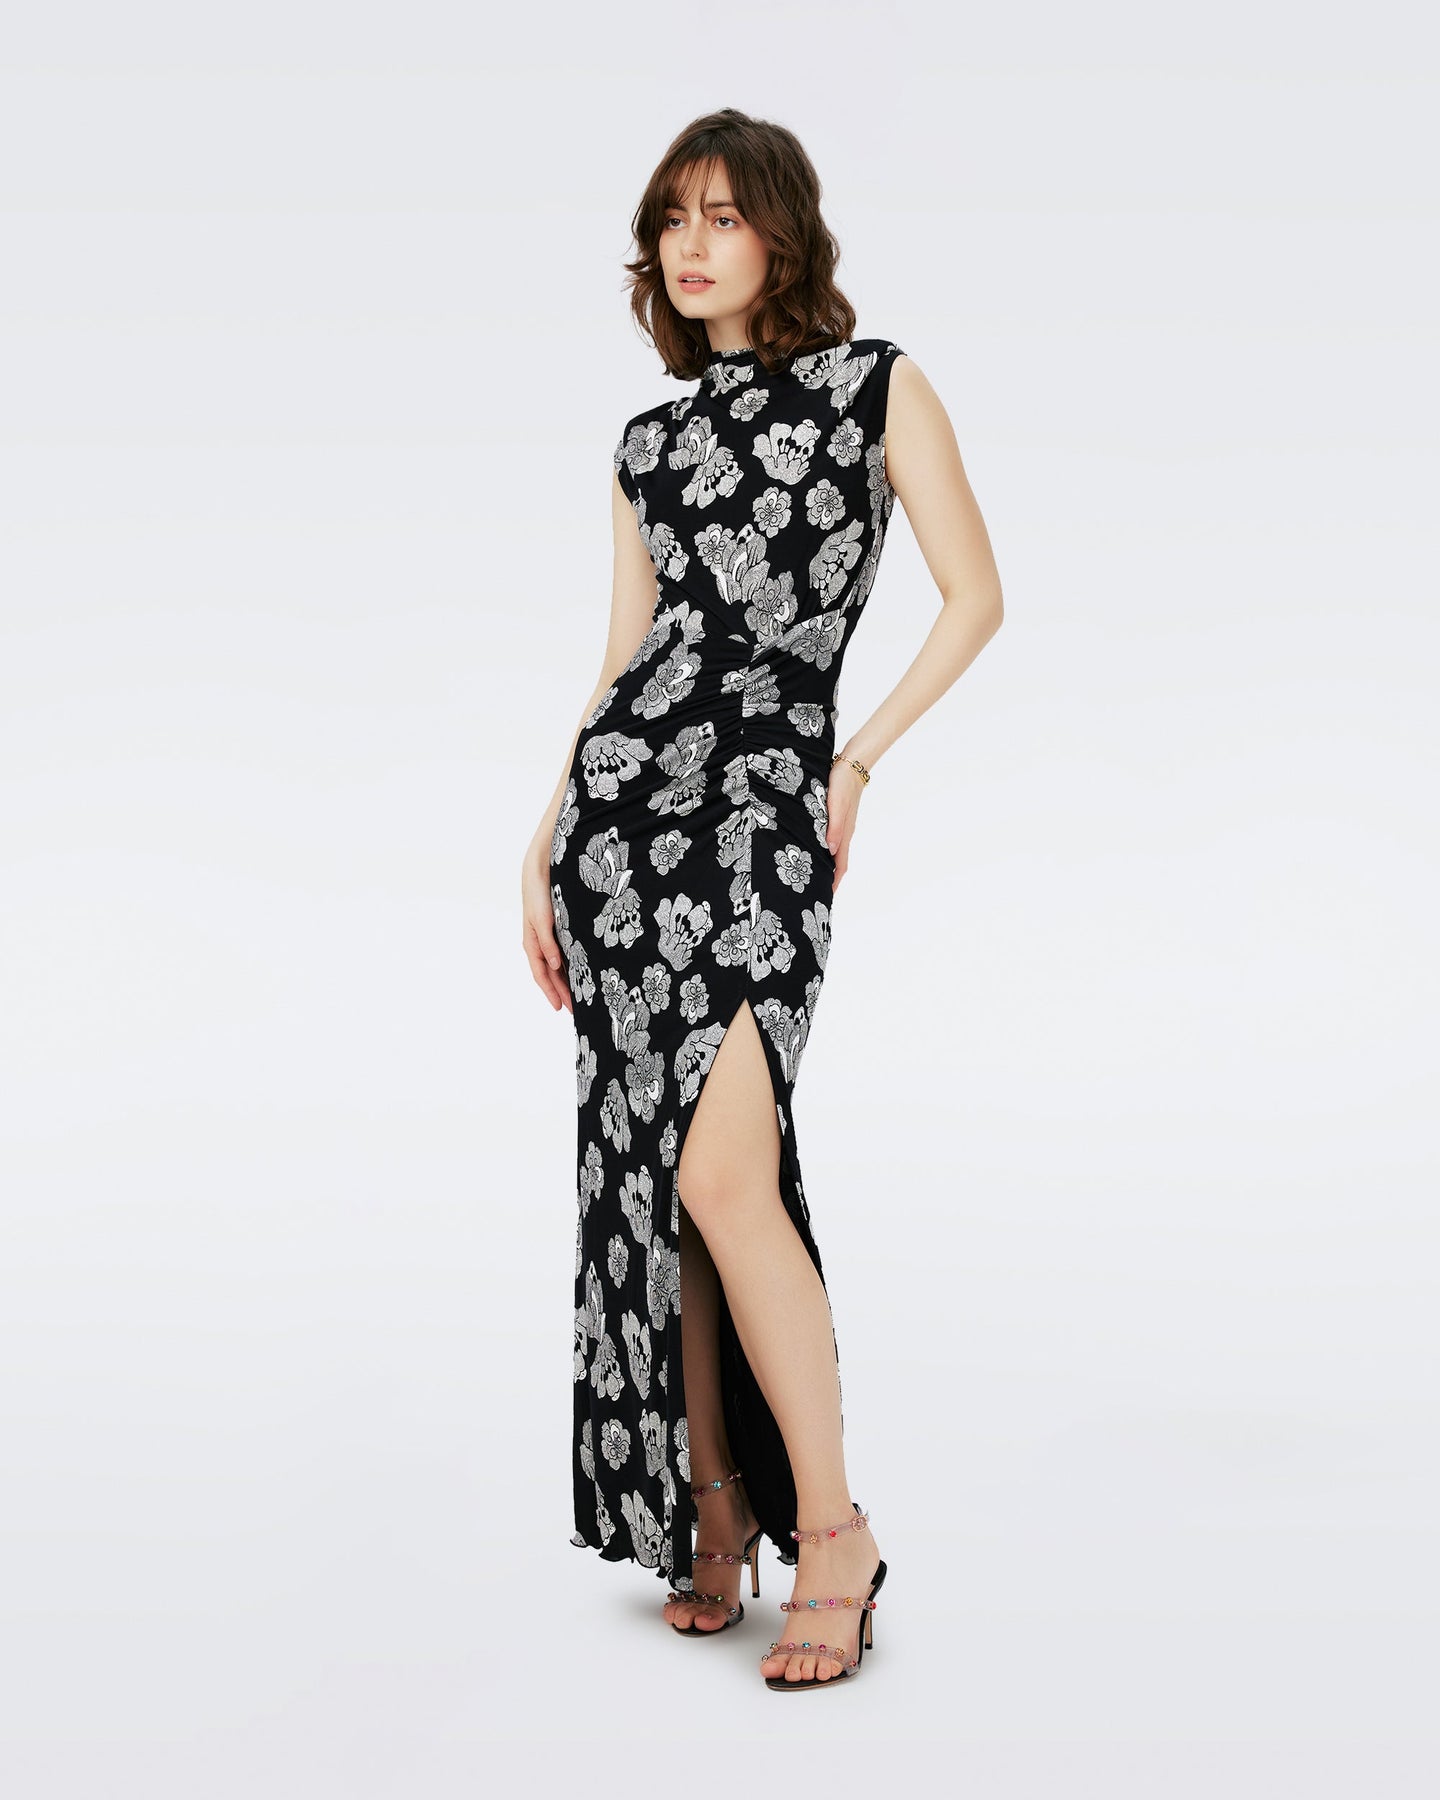 SHESKA DRESS IN DOTTED BUDS